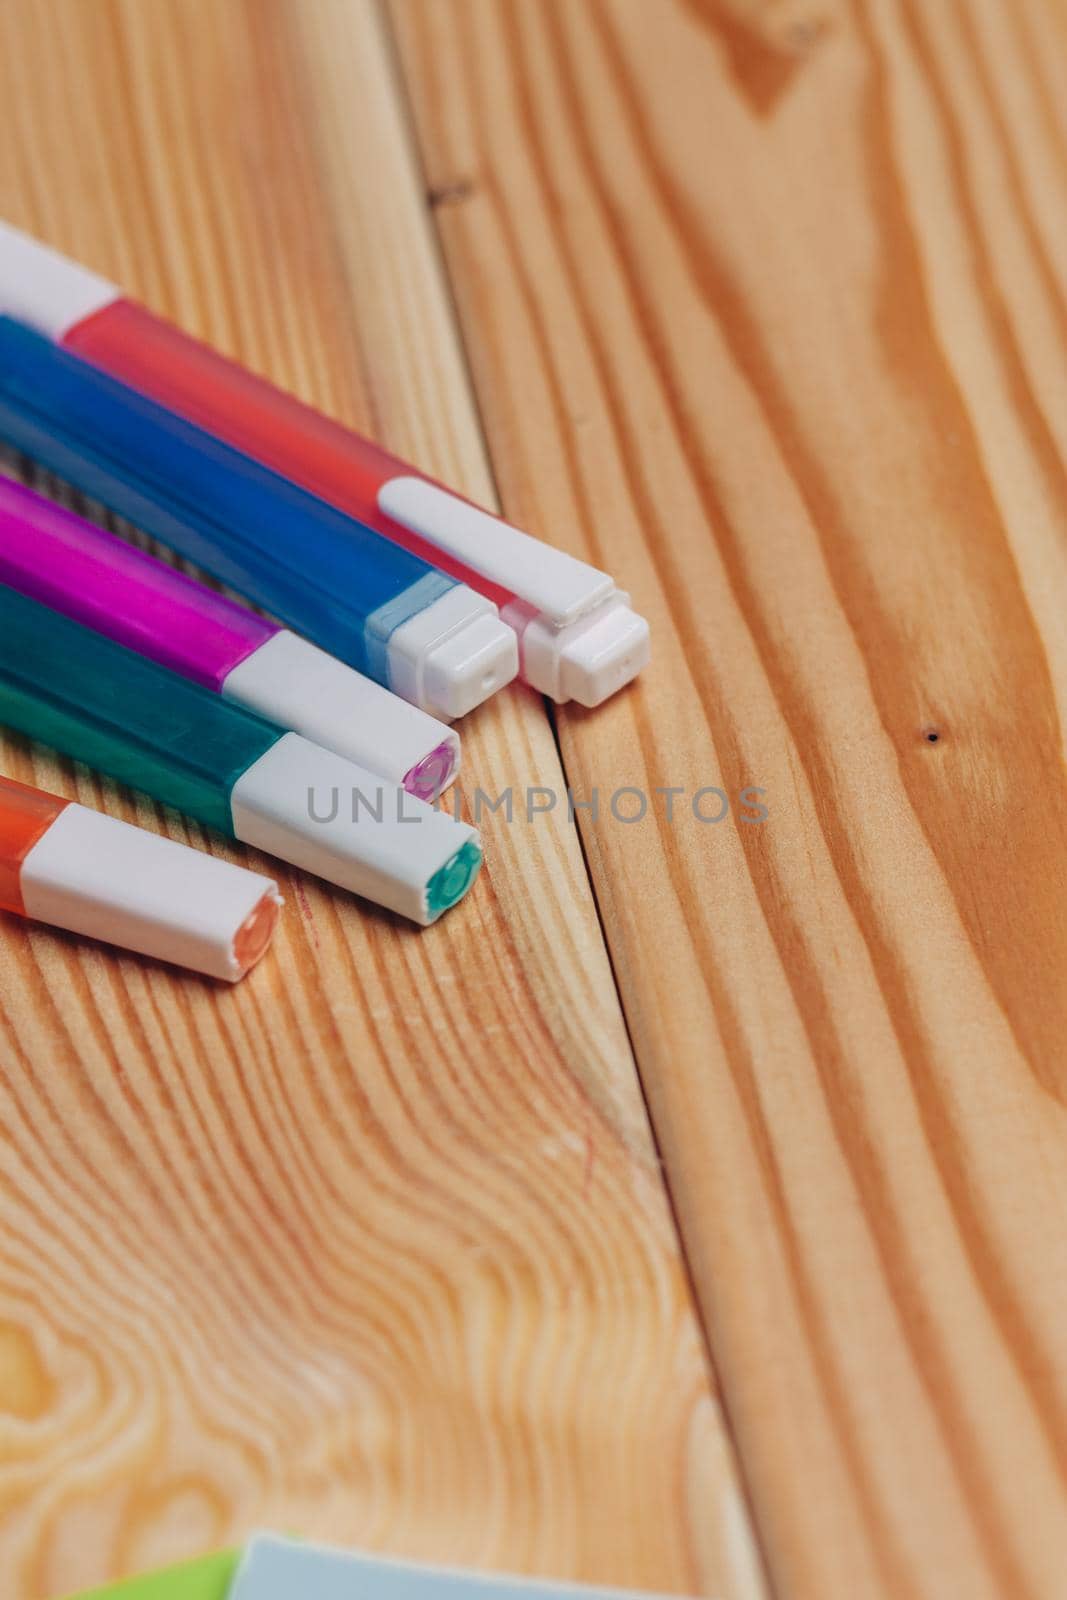 multicolored markers paper office school items wooden table. High quality photo